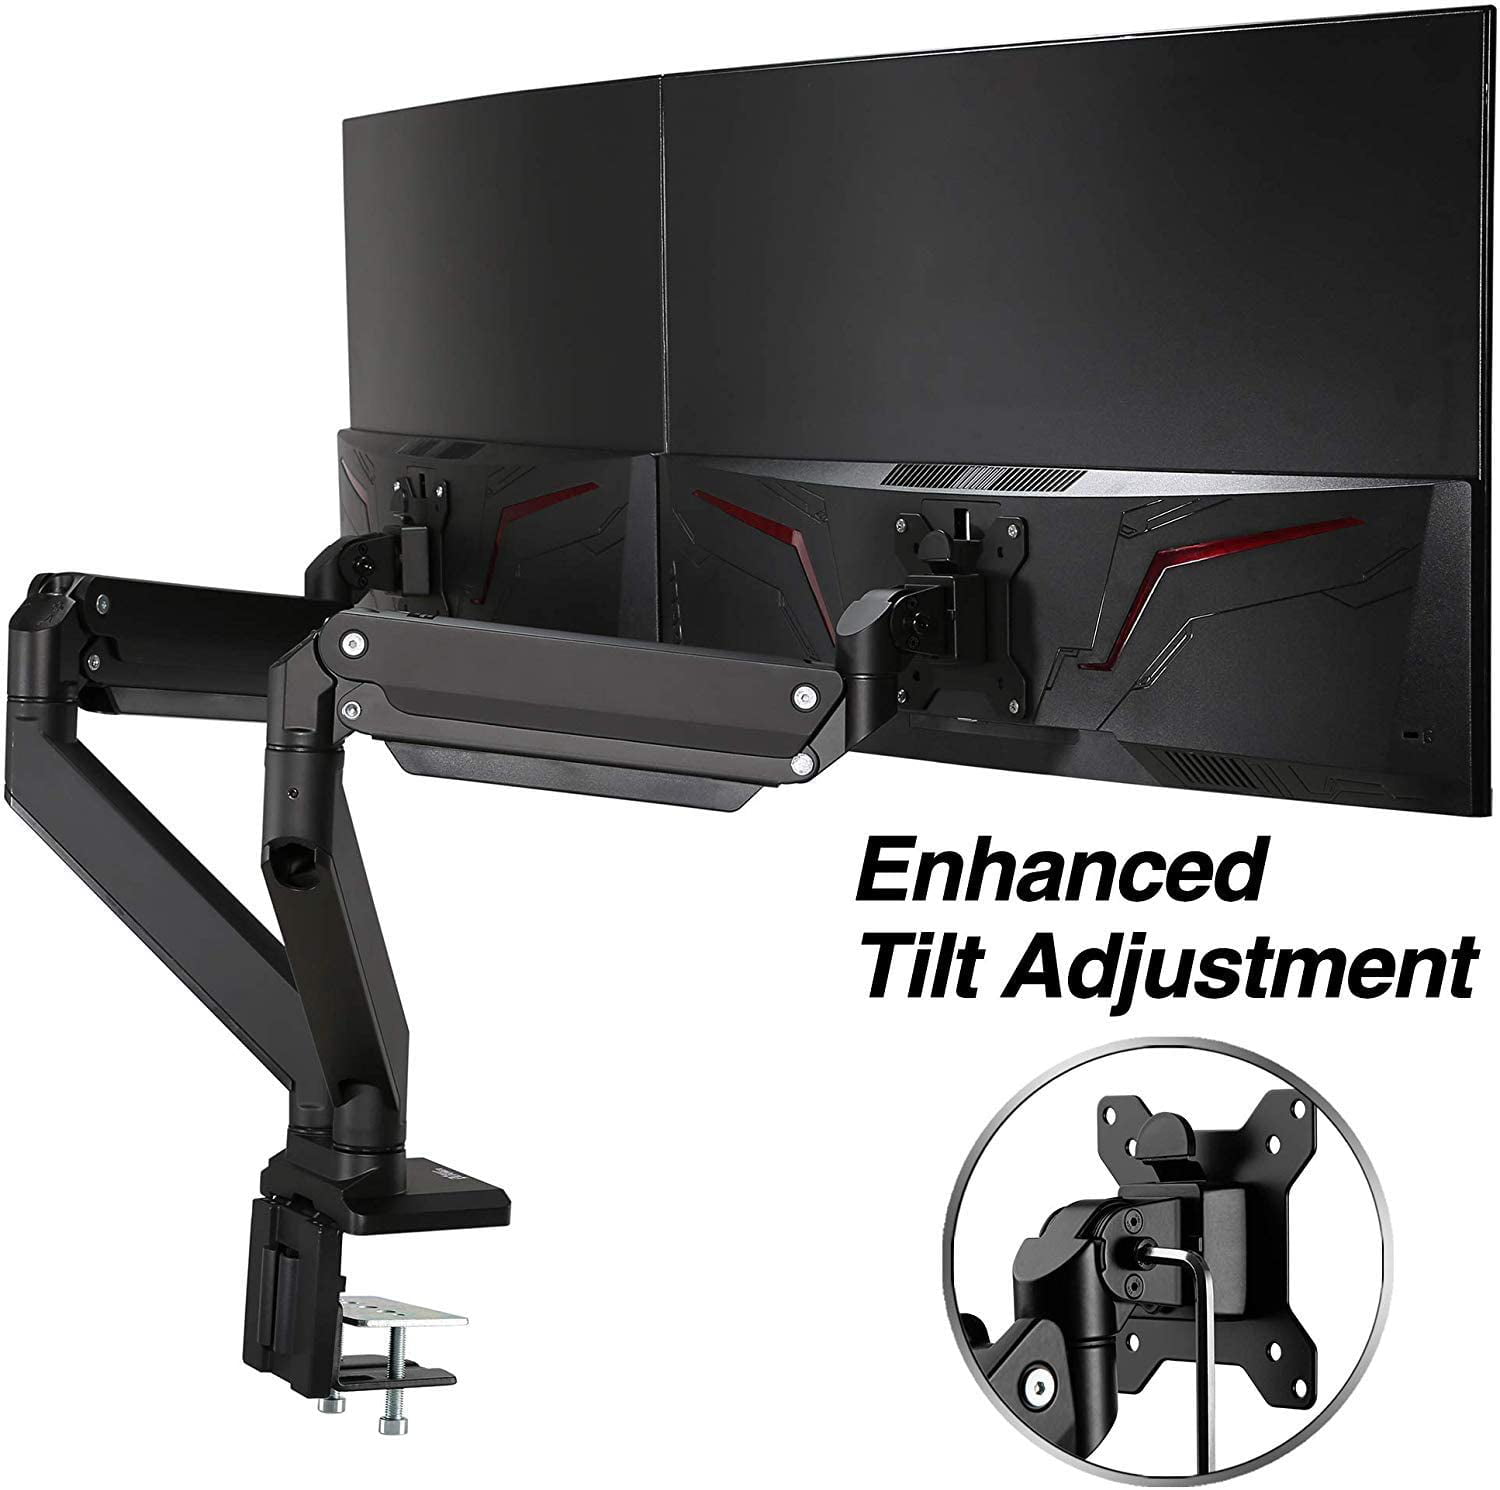 Dual HD LED Desk Mount Monitor Stand 2 Arm Display Bracket LCD Screen TV Holder 